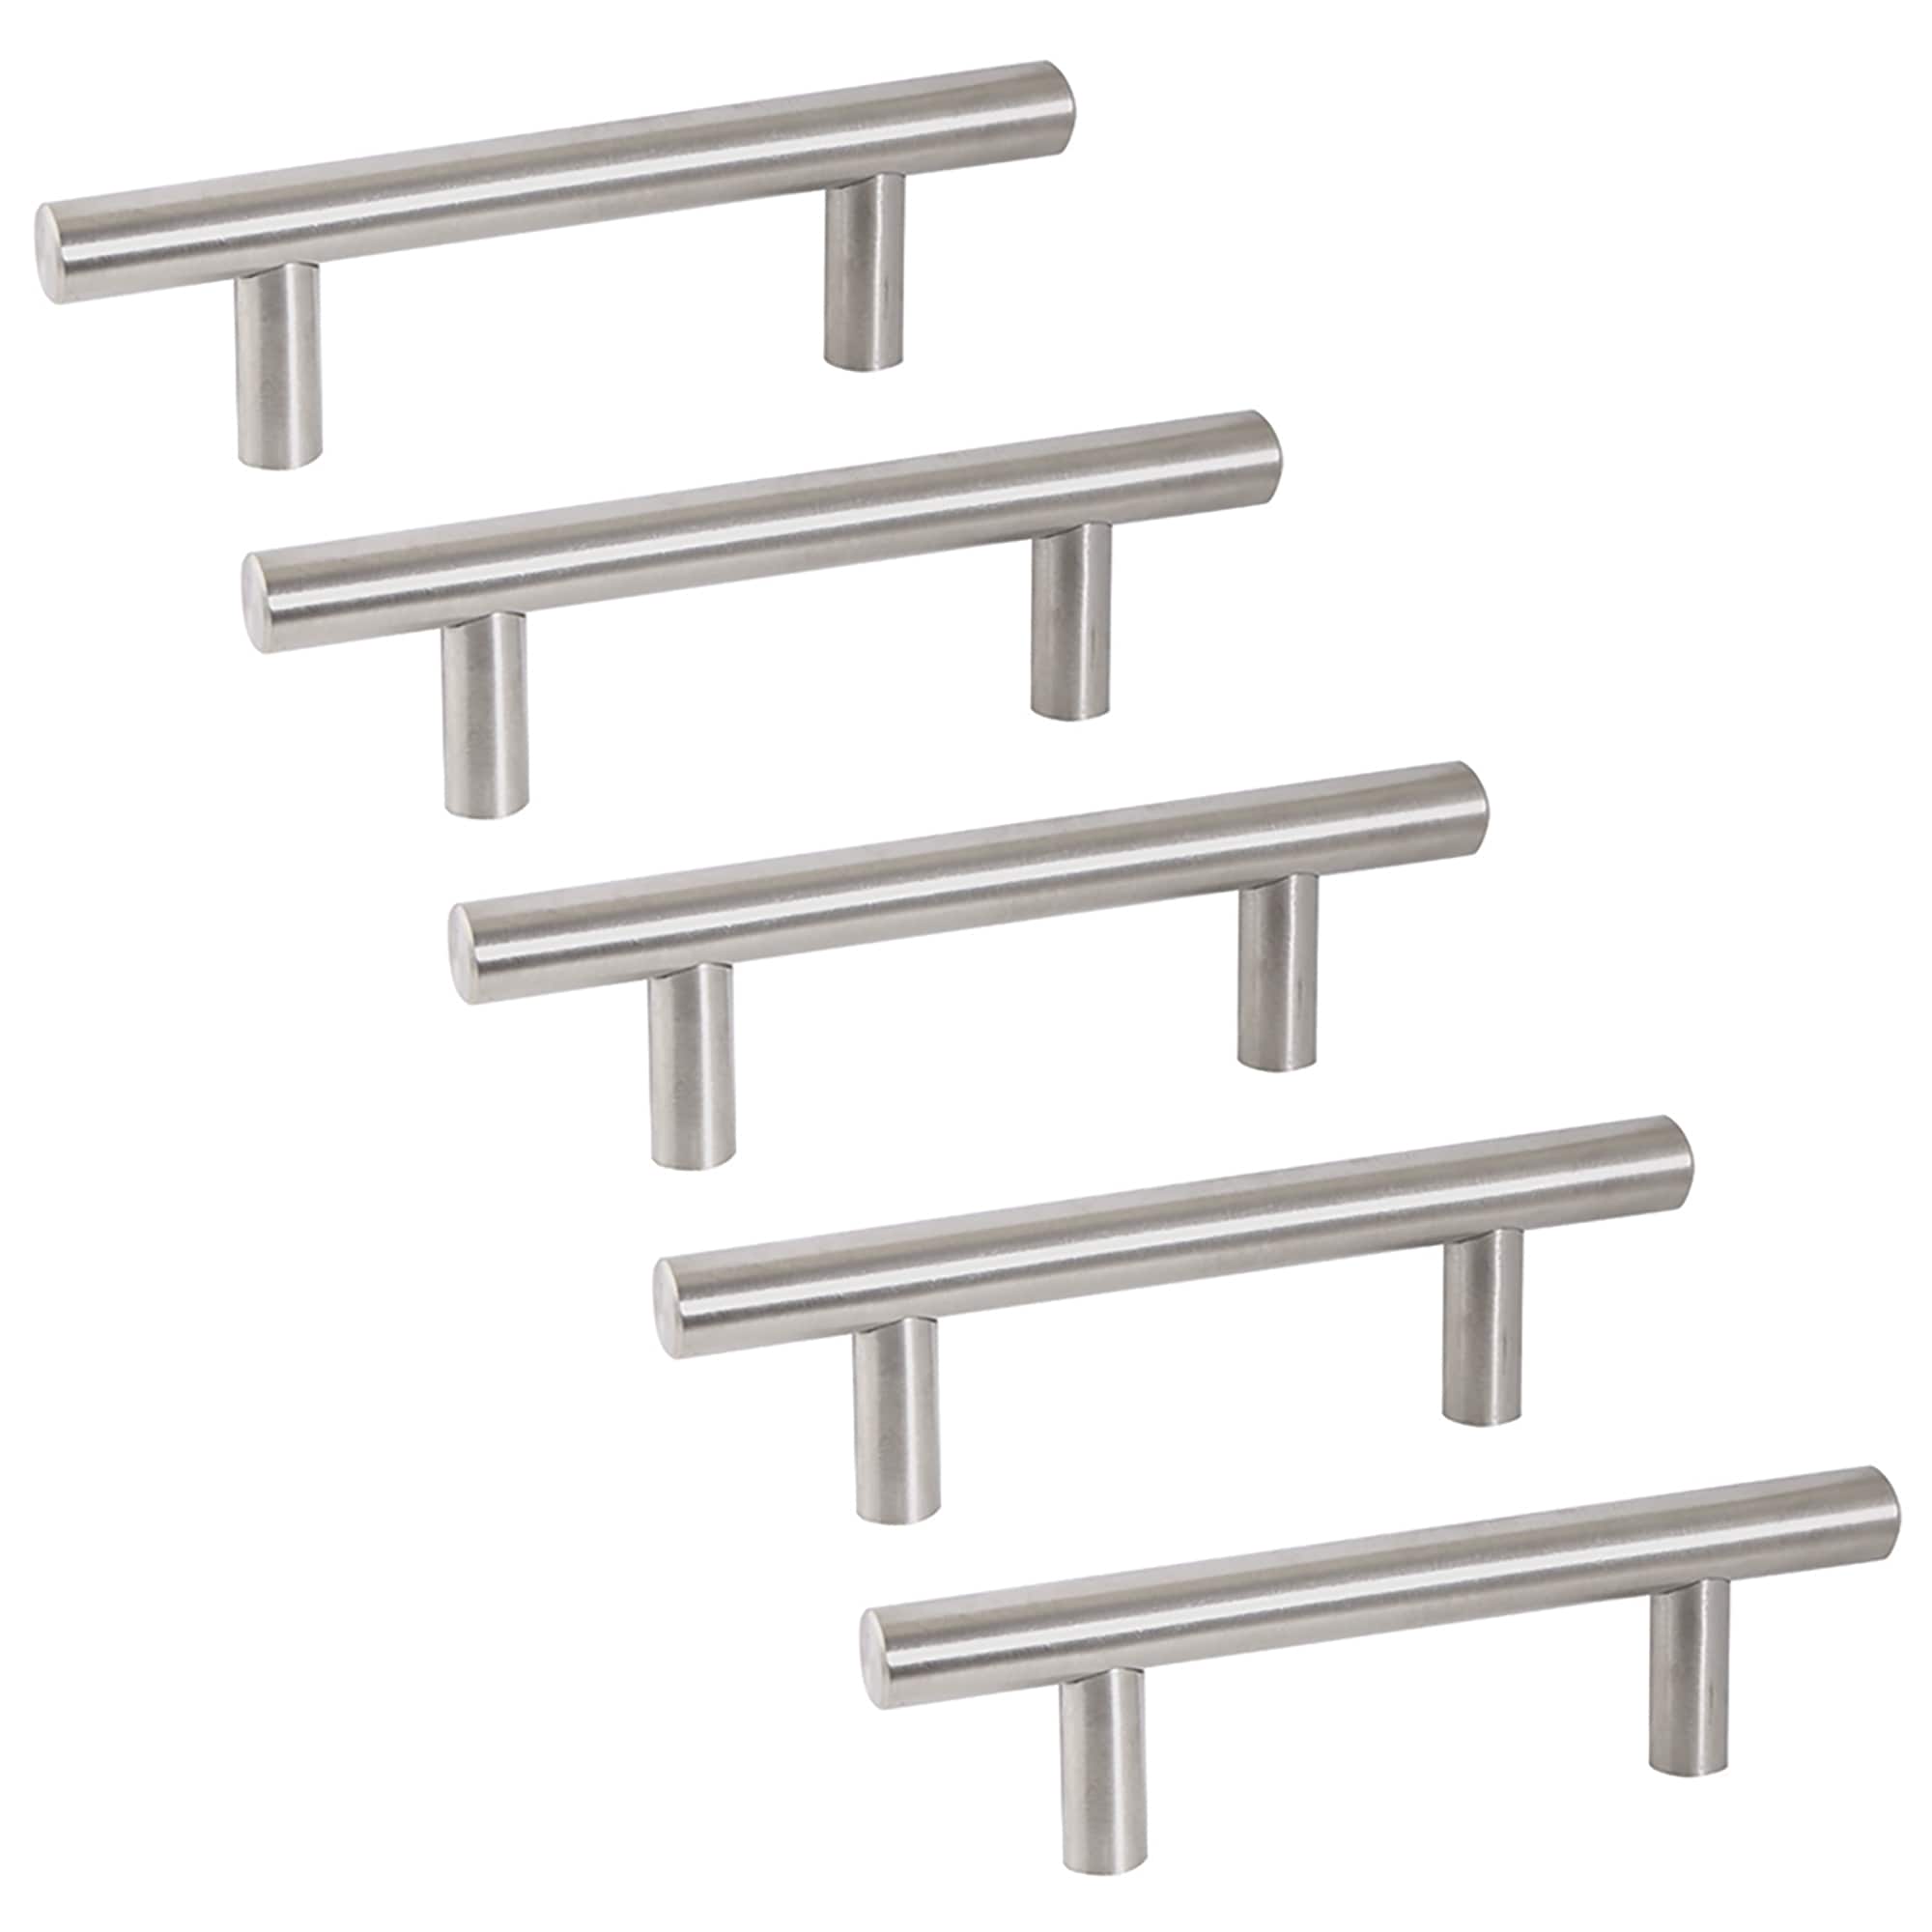 Design House 564641 Solid 96mm C-C Cabinet Pull, Satin Nickel, 5-Pack